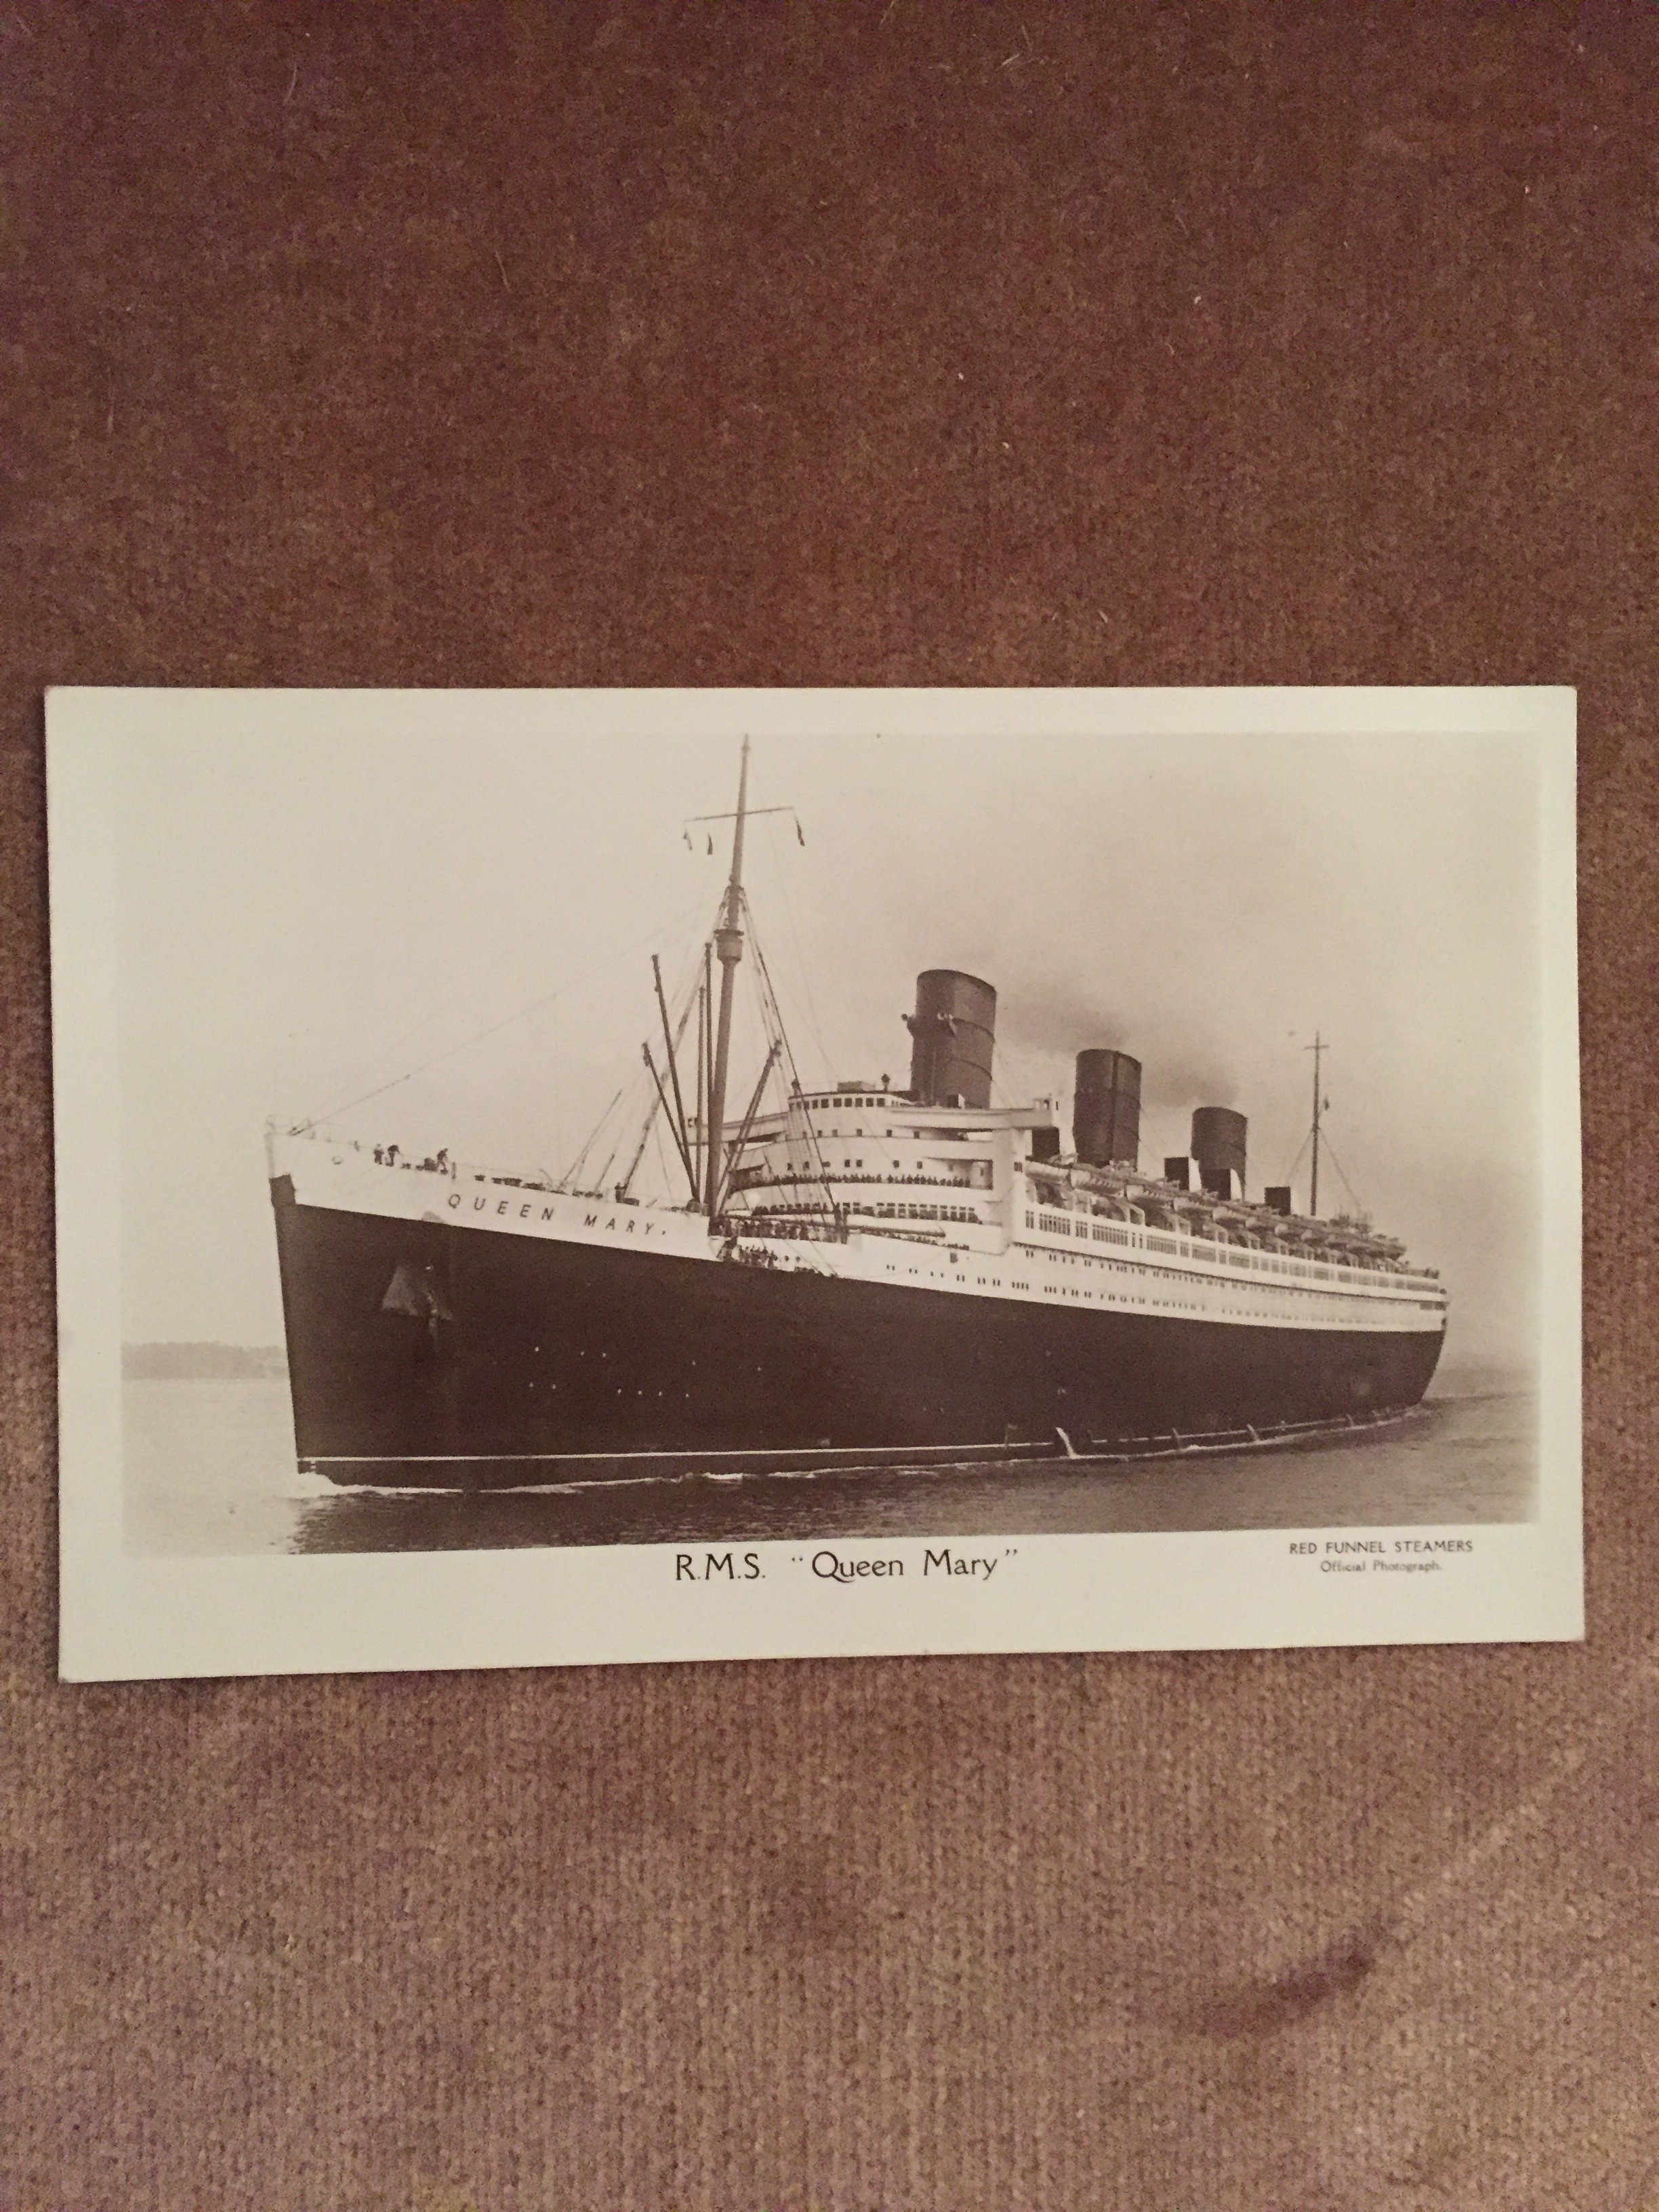 UNUSED B/W POSTCARD FROM THE VERY FAMOUS OLD CUNARD LINE VESSEL THE QUEEN MARY